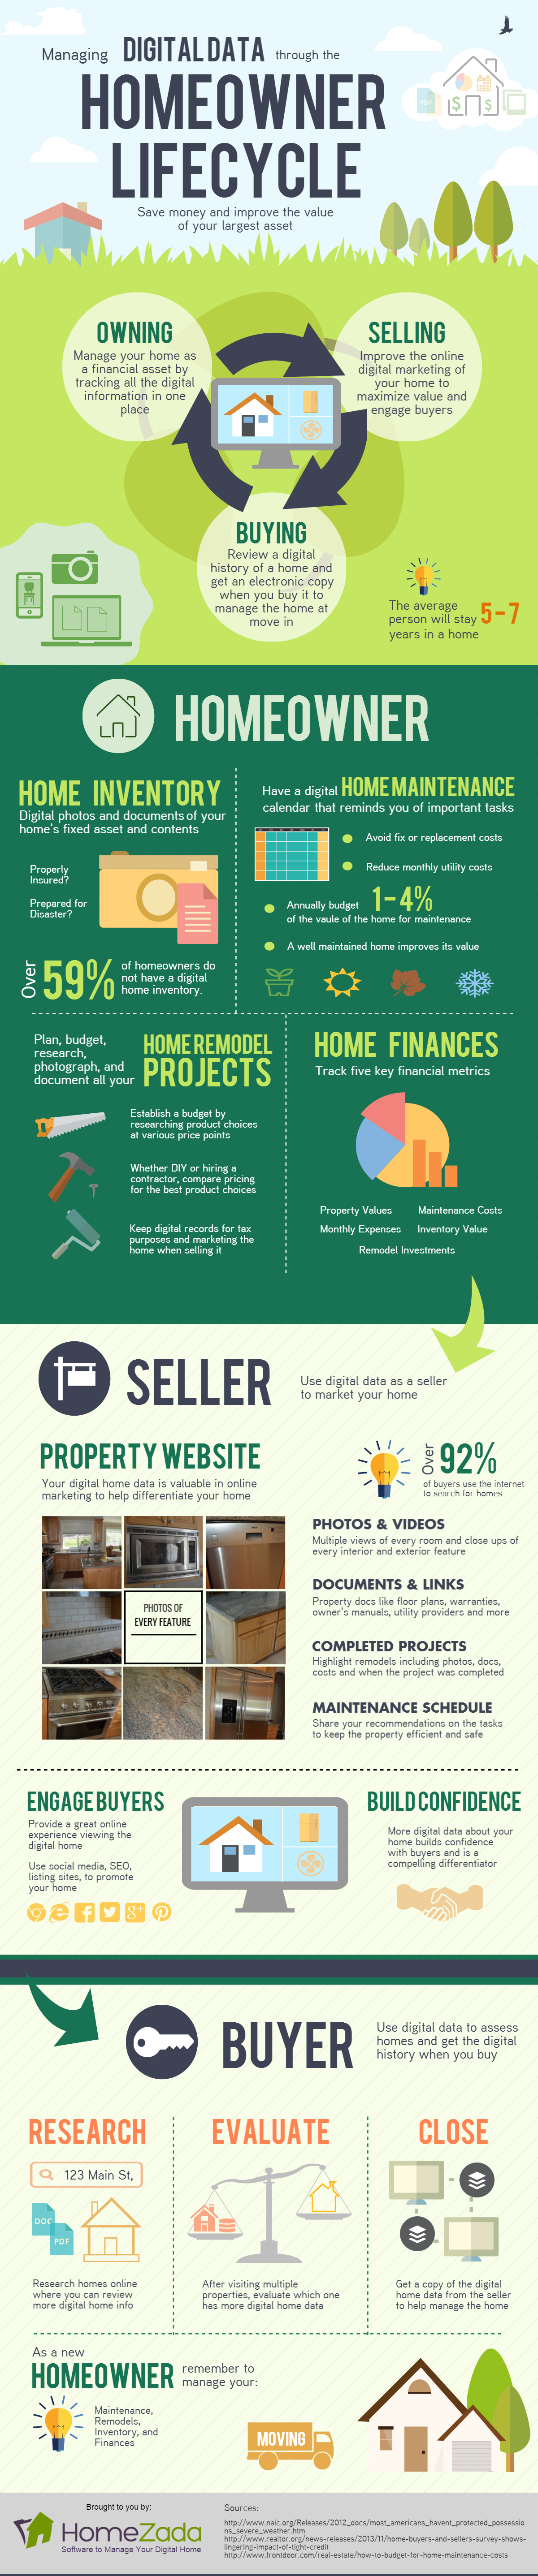 Digital Home Data through the Homeowner Lifecycle Infographic